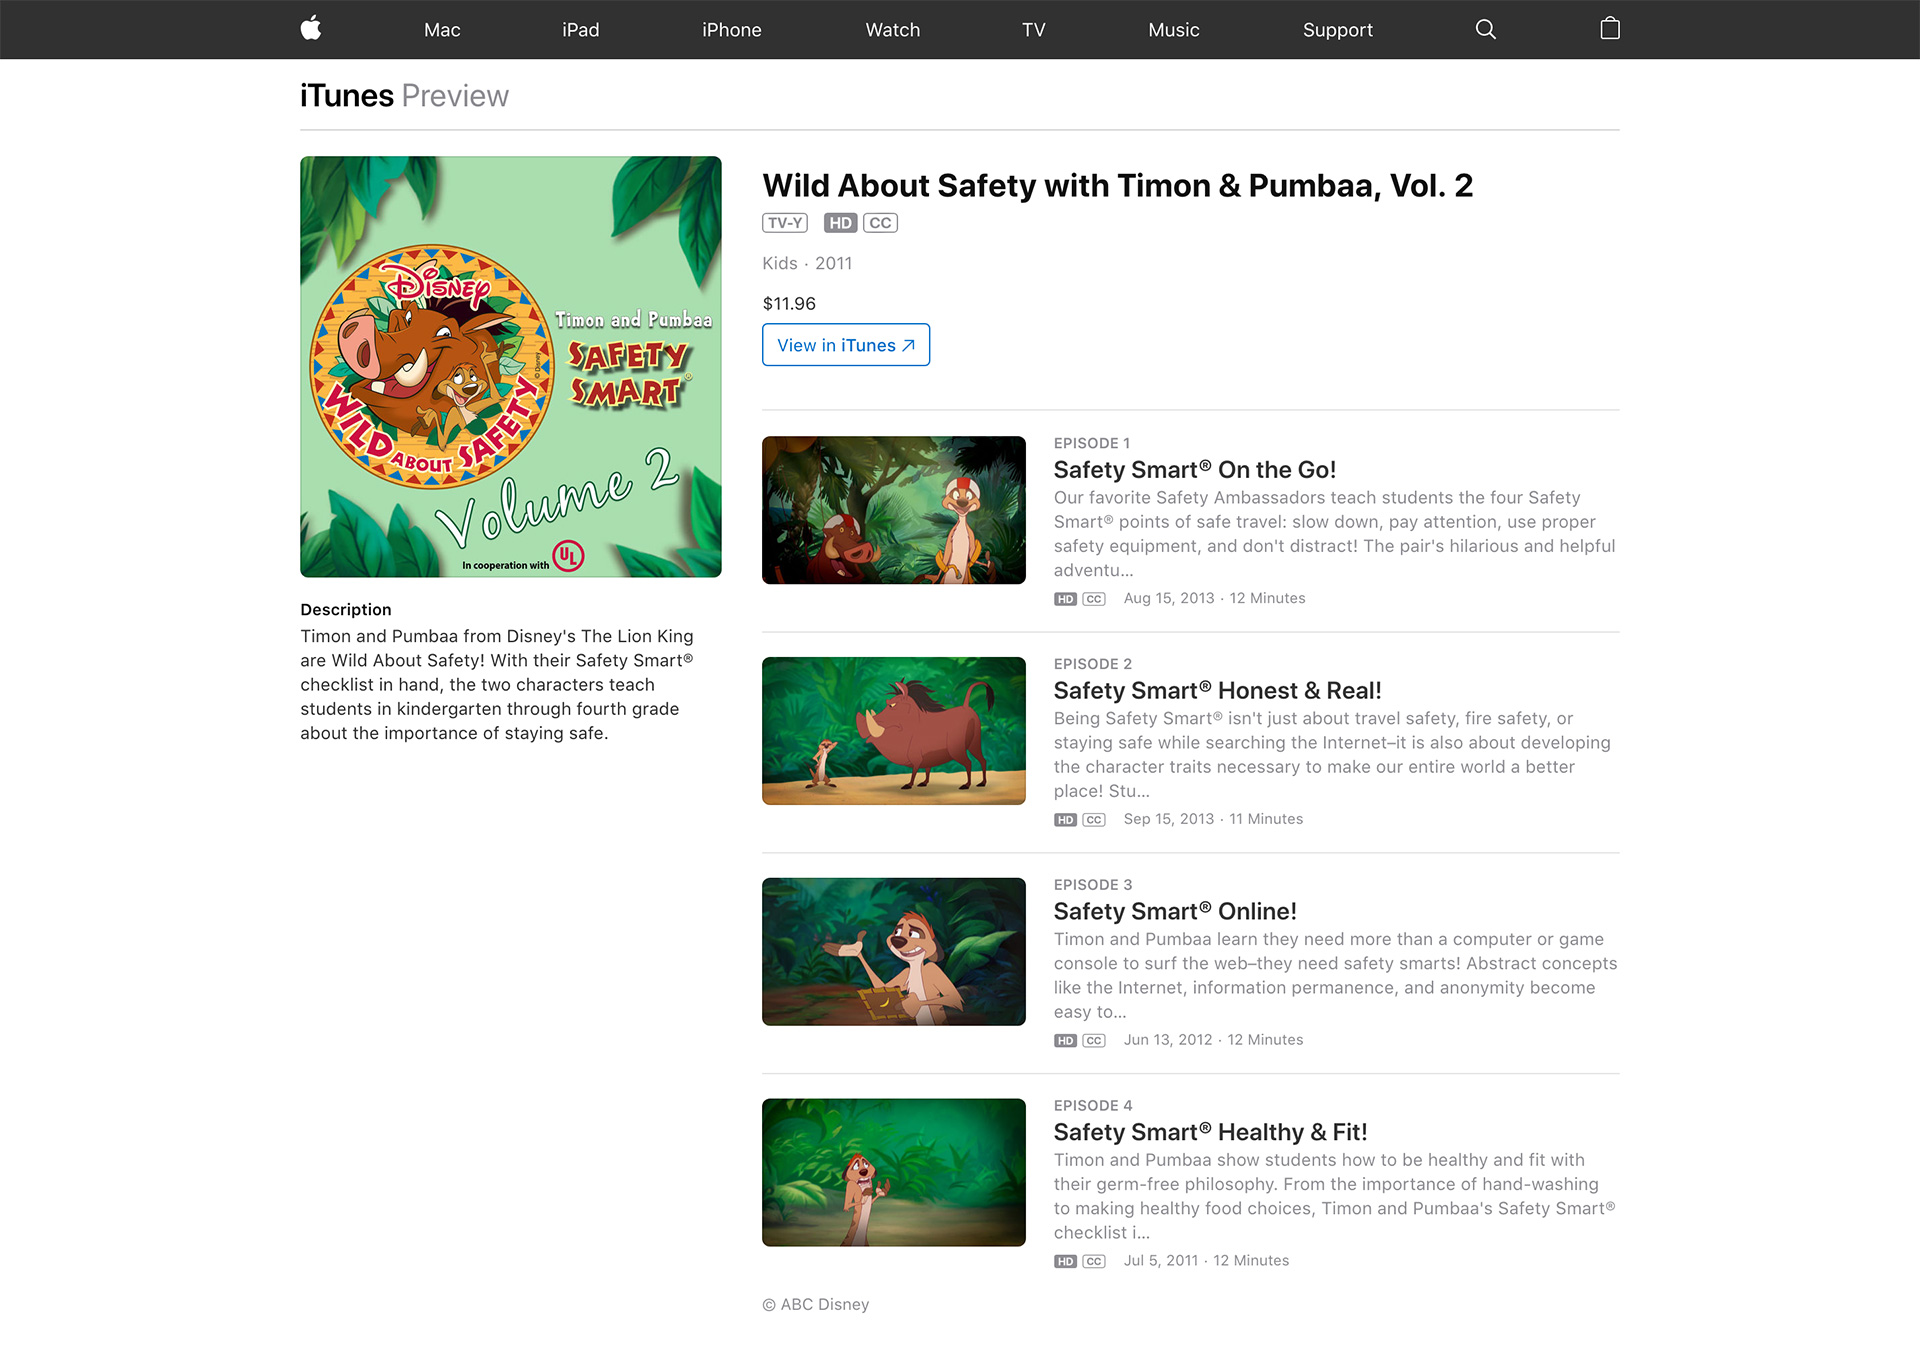 Wild About Safety with Timon &amp; Pumbaa series on iTunes.